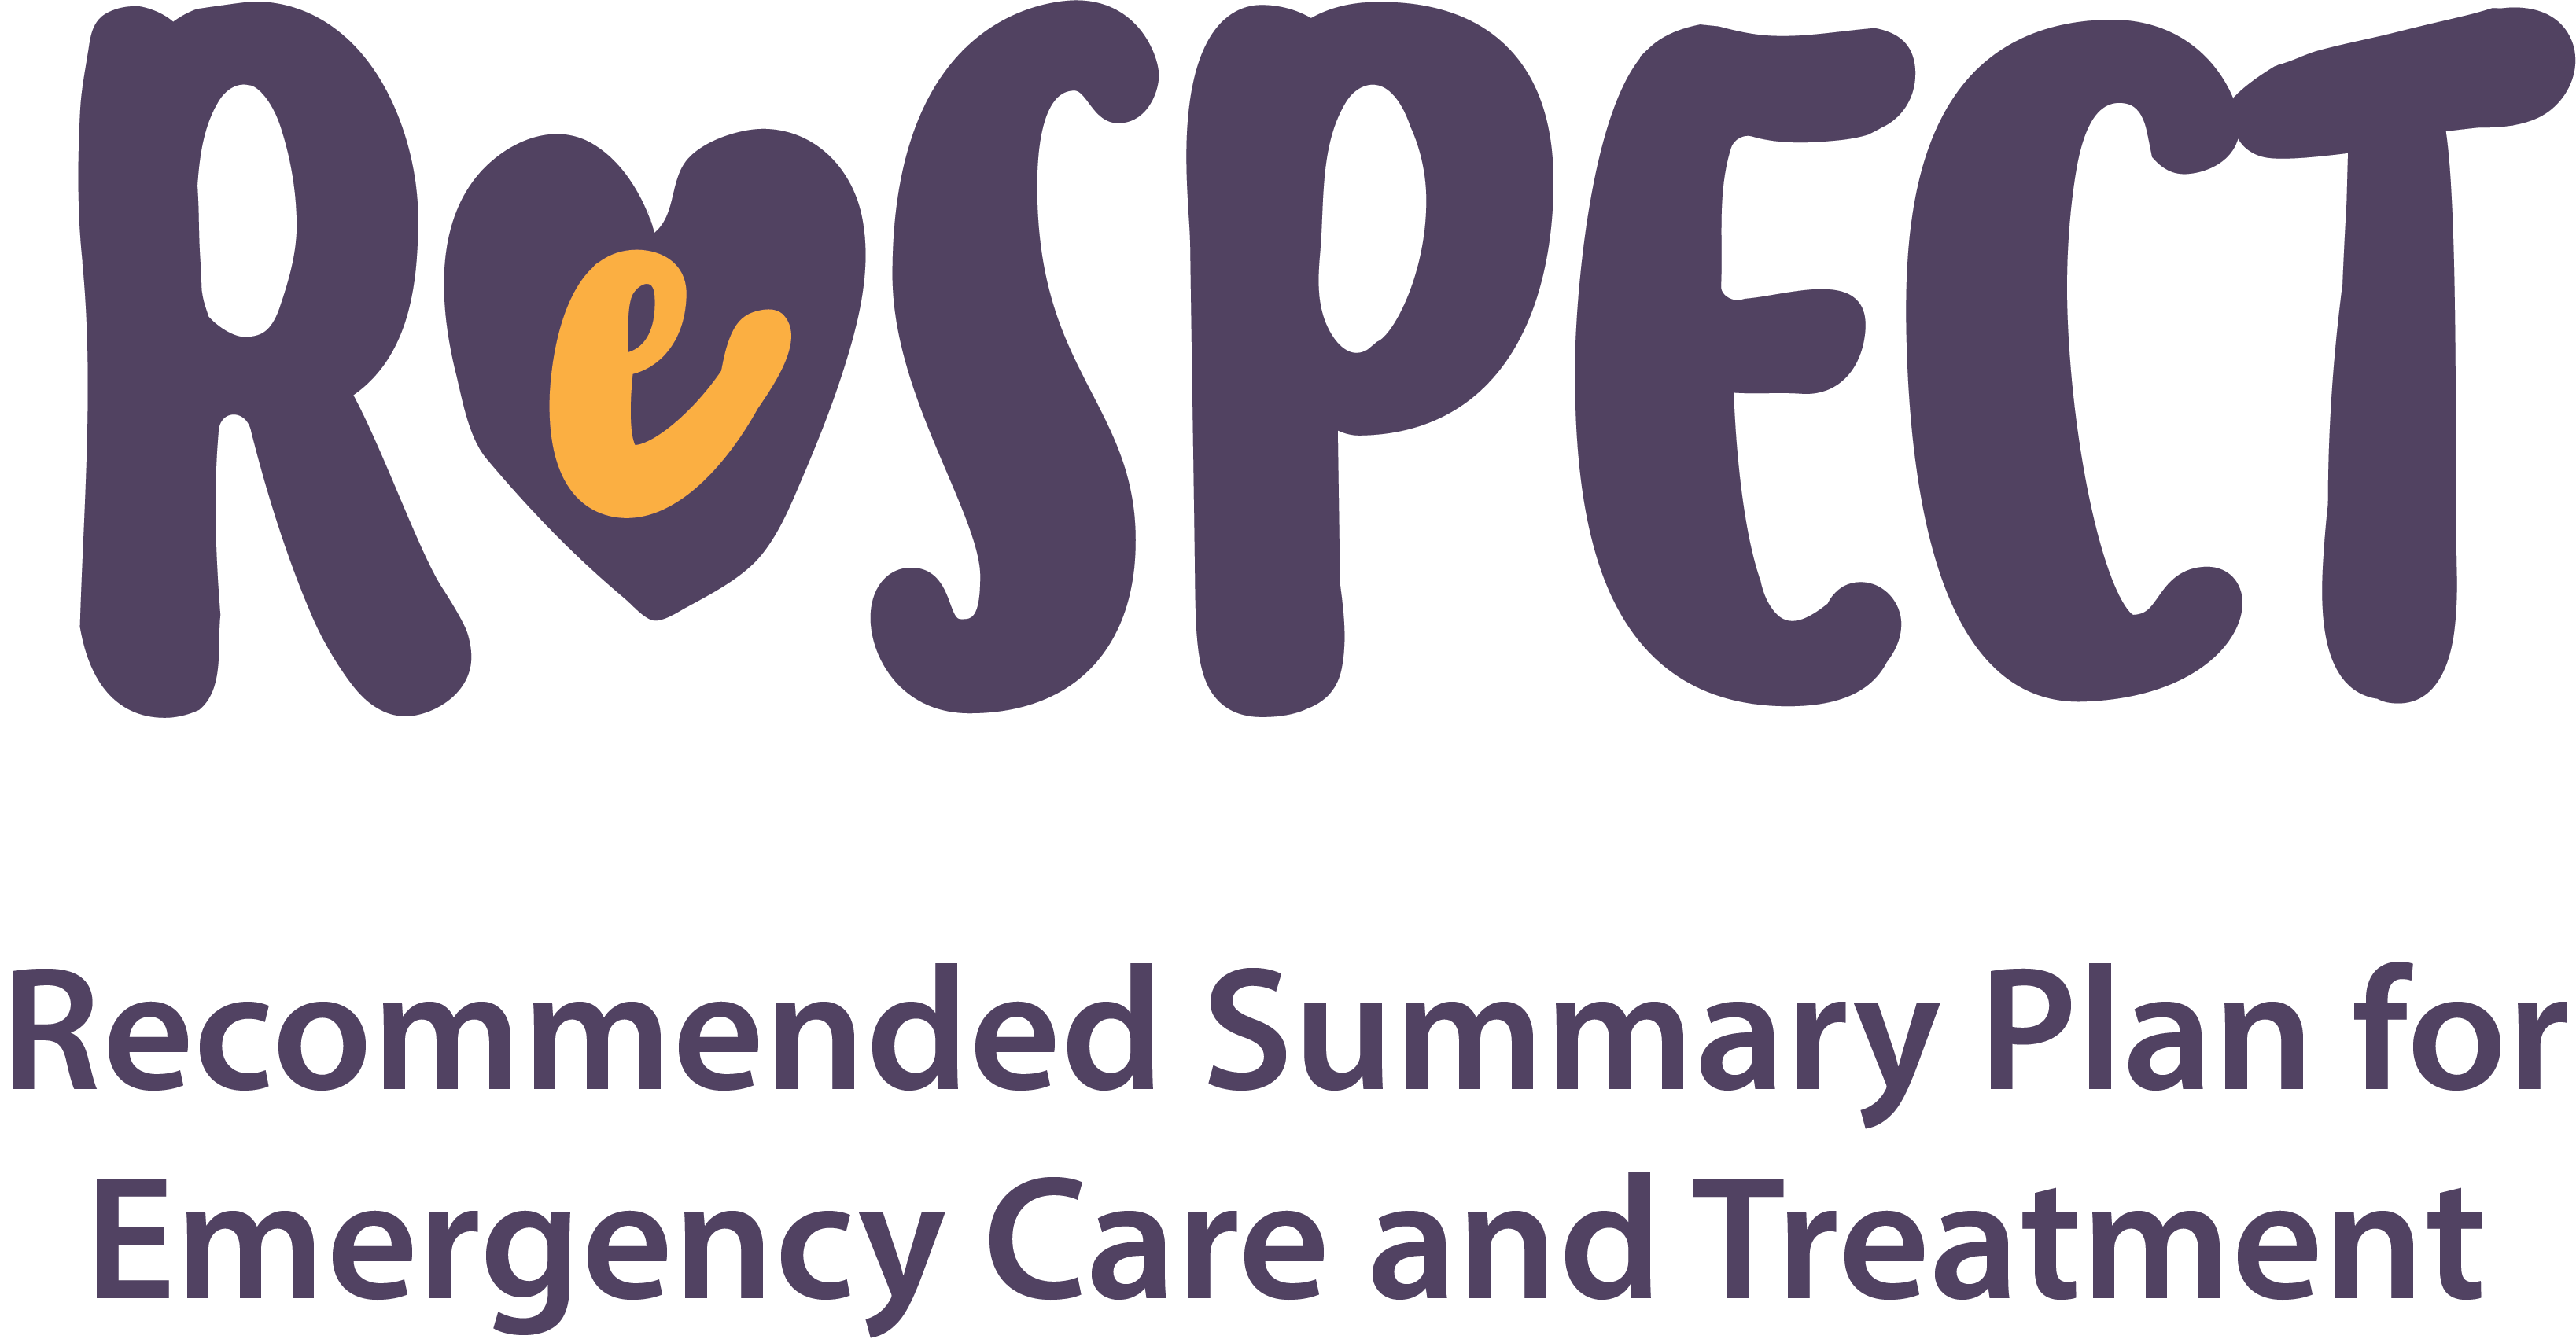 Respect Logo - New process to give patients more say on emergency care